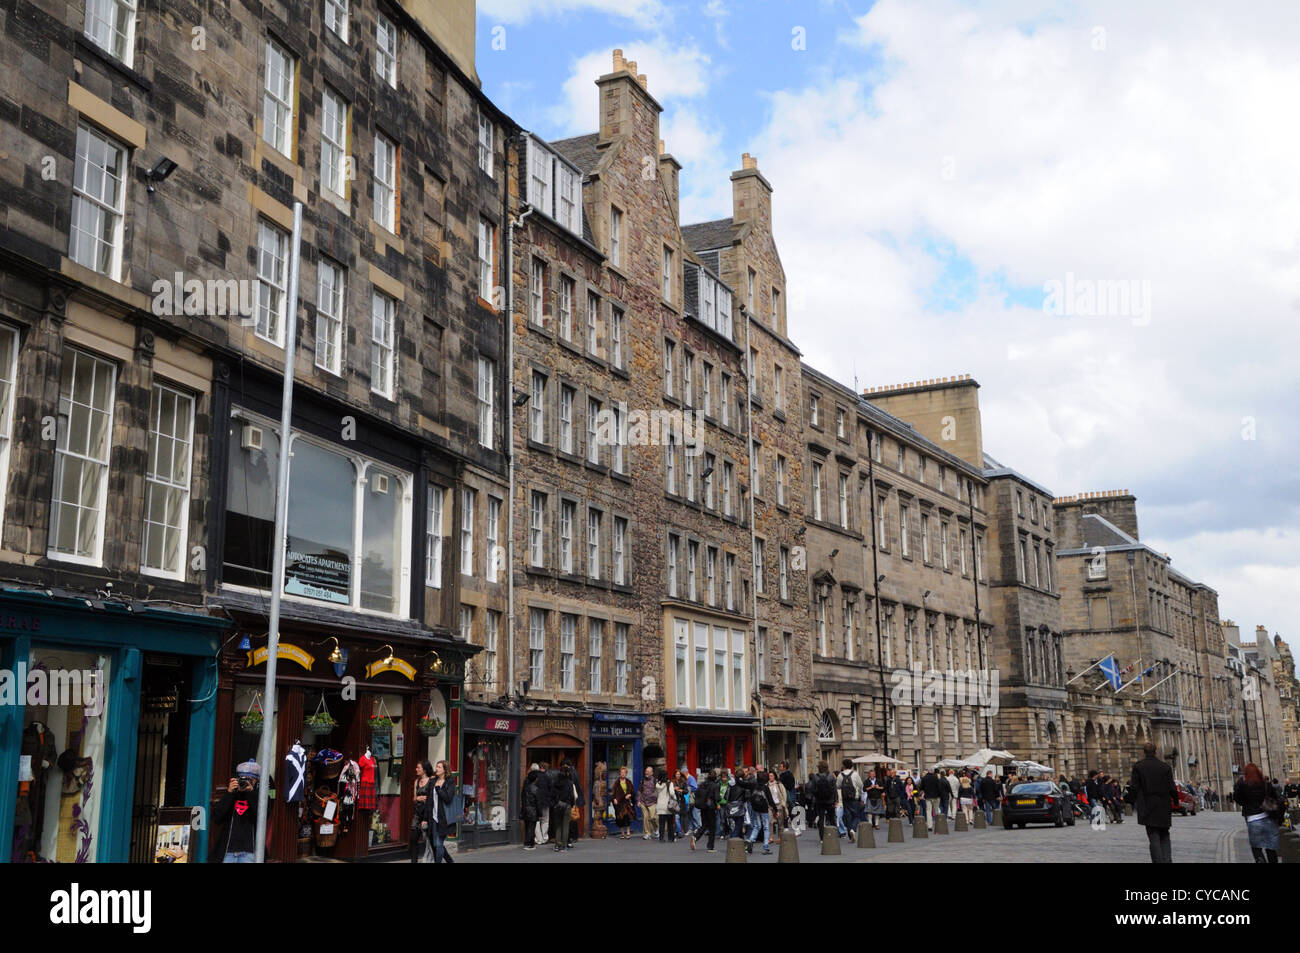 tourists who are shopping in the picturesque High street, Edinburgh, Scotland, Europe Stock Photo